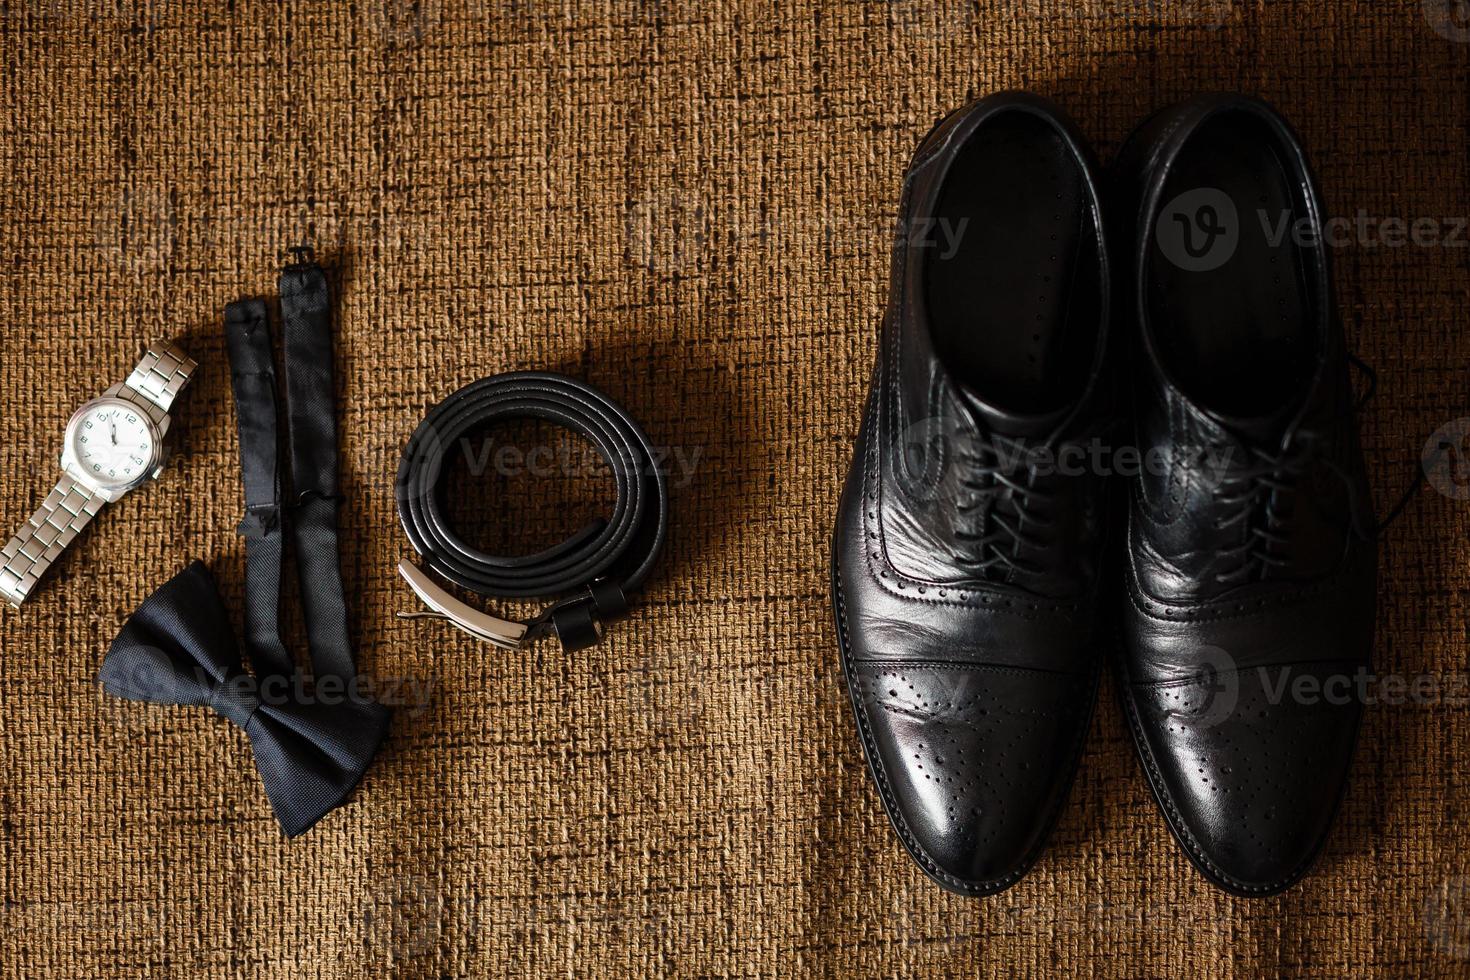 black shoes, black belt, black watch, black butterfly, cufflinks and perfume on a brown background with sacking photo